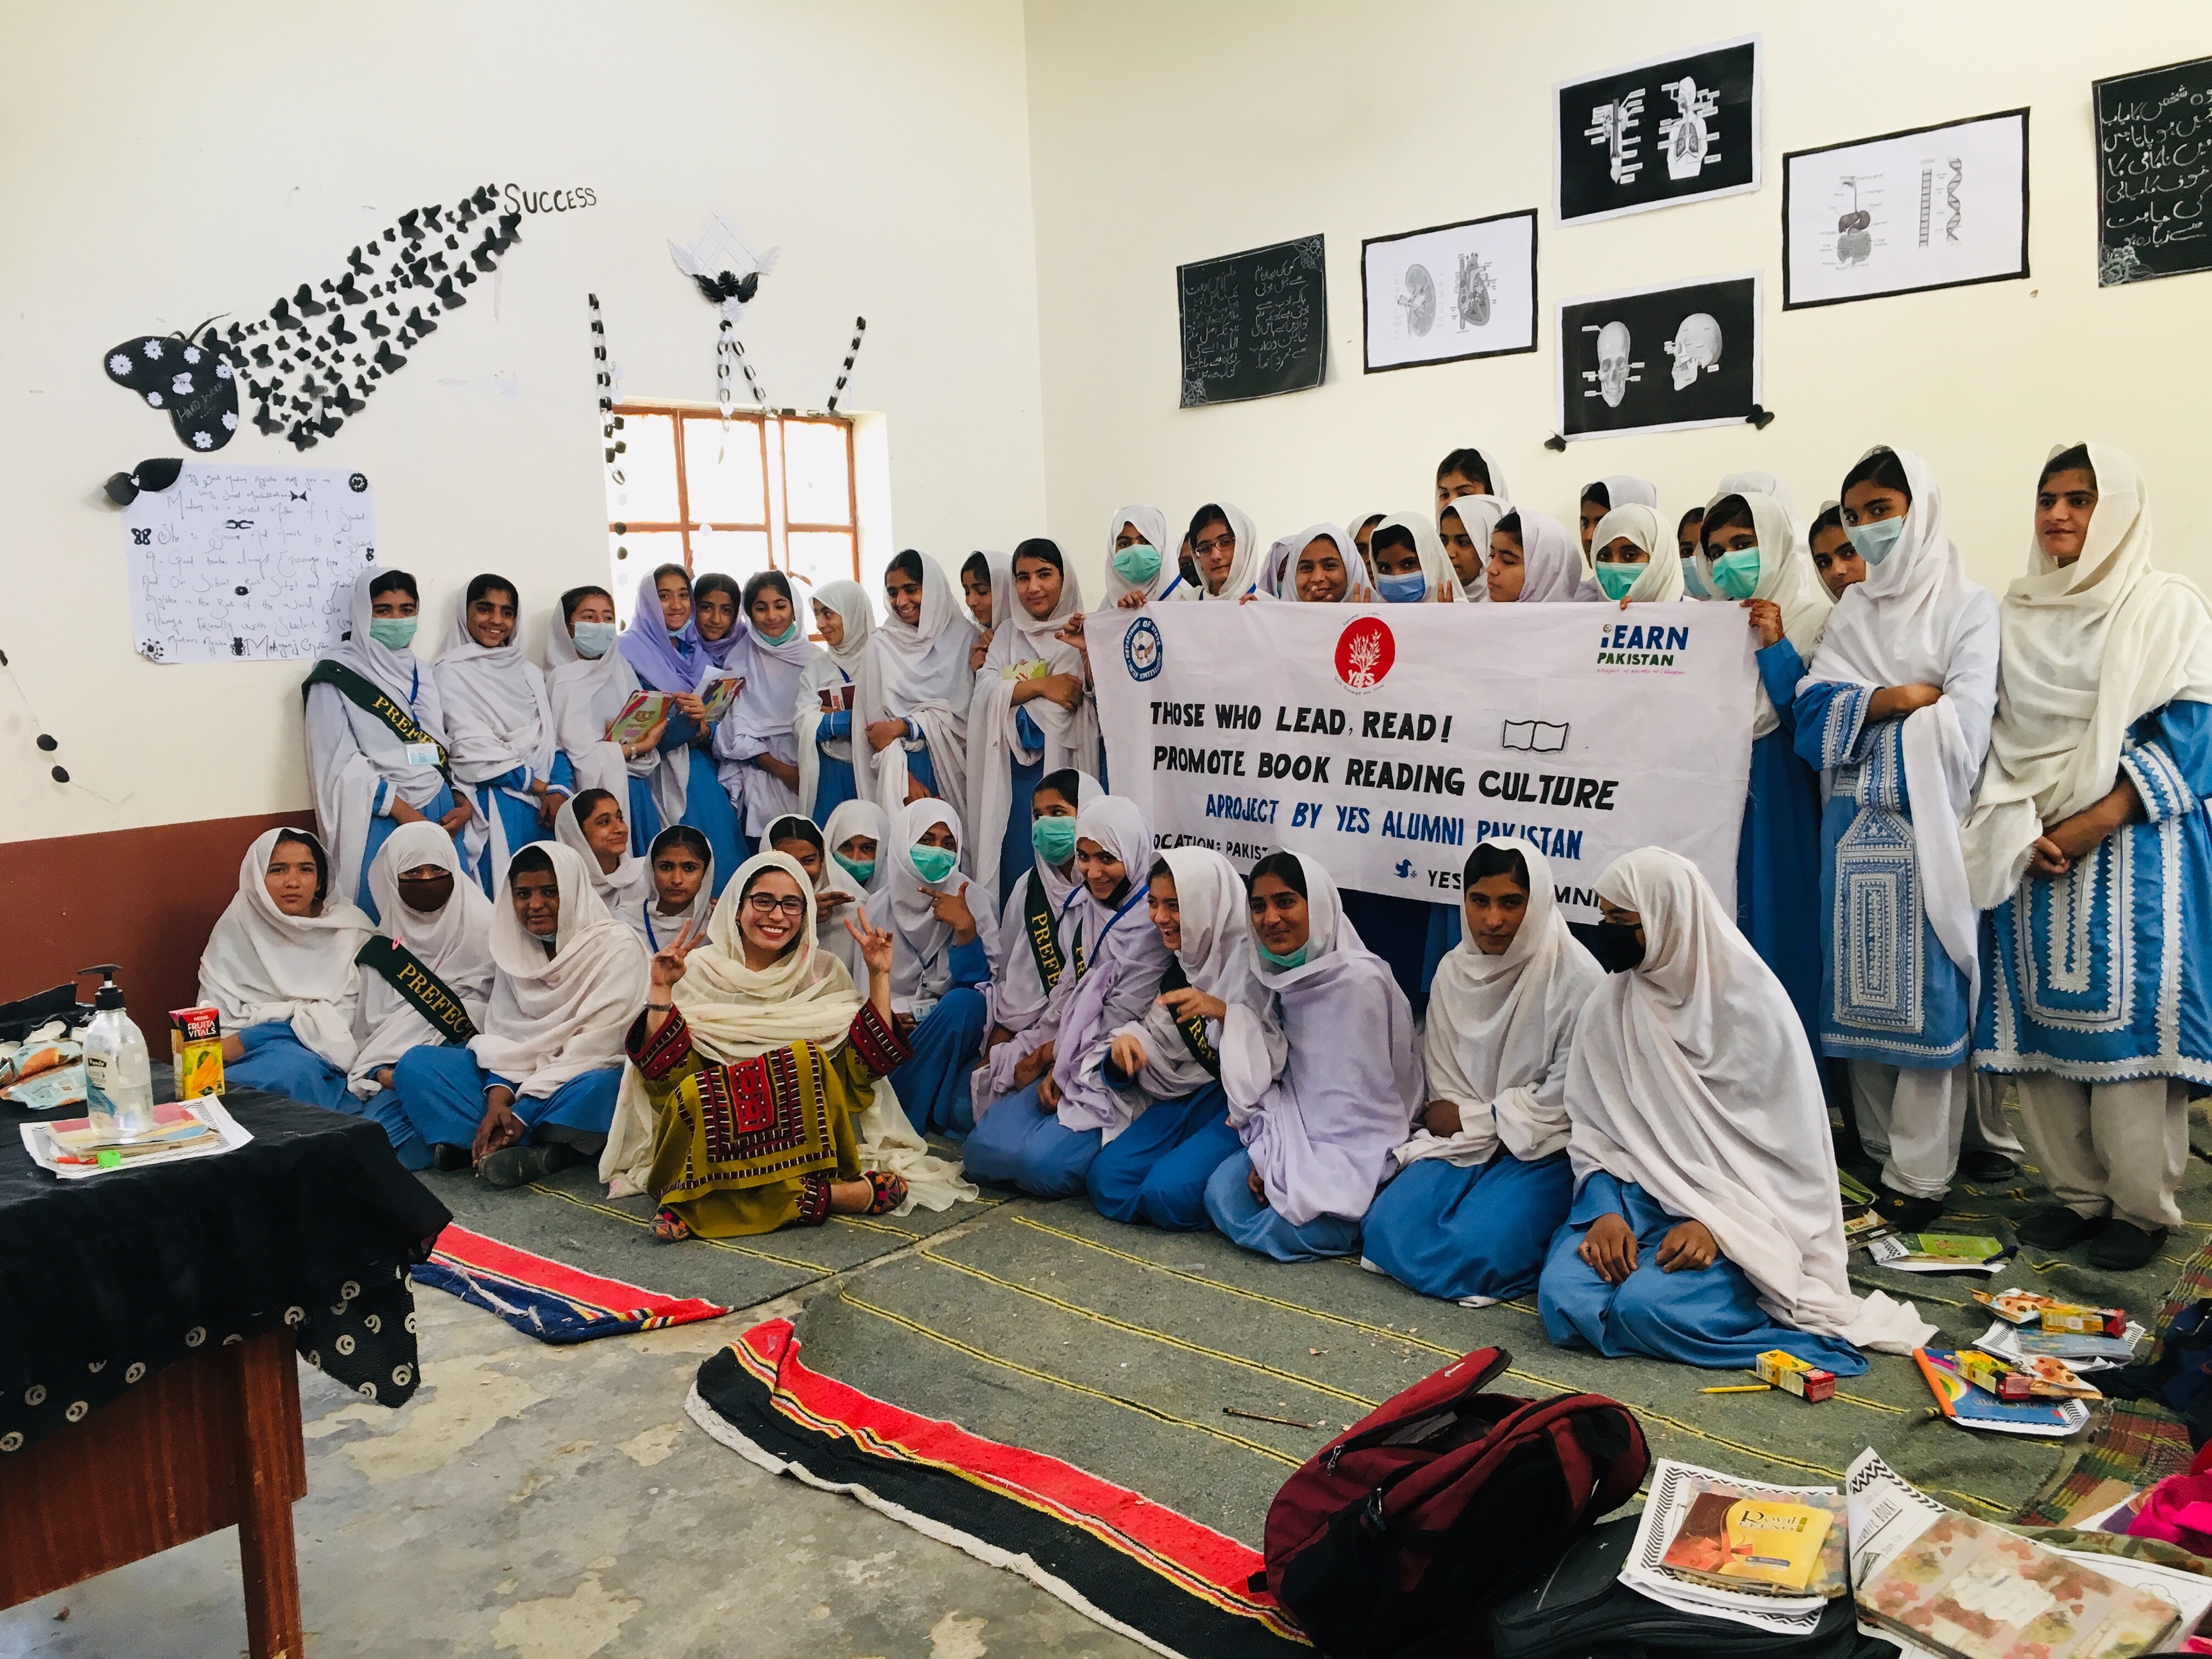 Girls from a public school sit in a classroom with some of them holding a sign that reads "Those who read. Lead!"